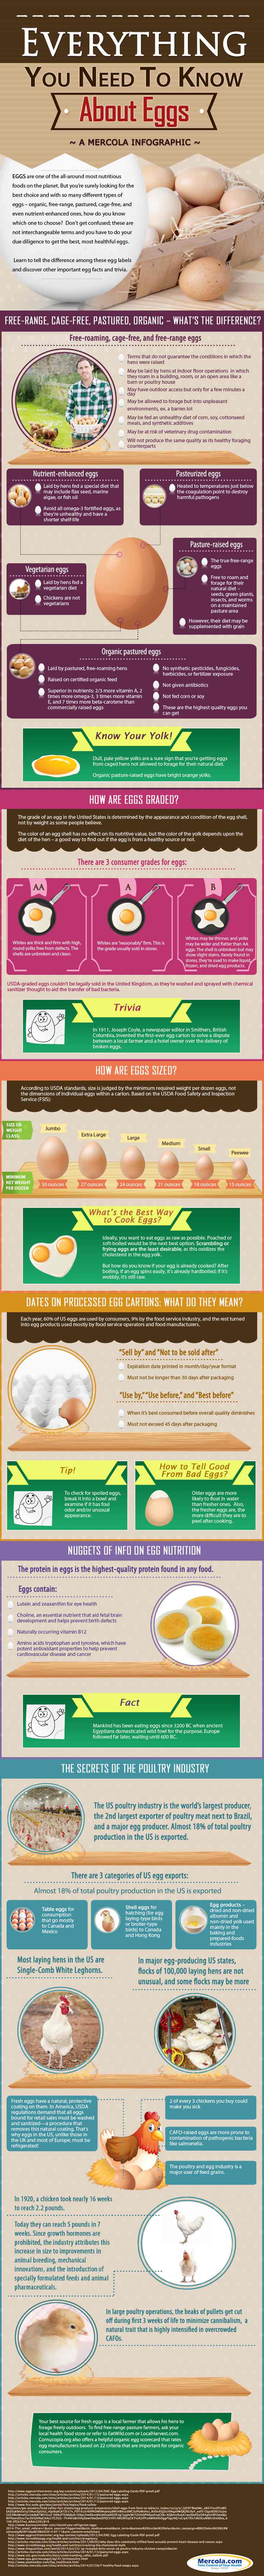 Egg Nutrition Facts